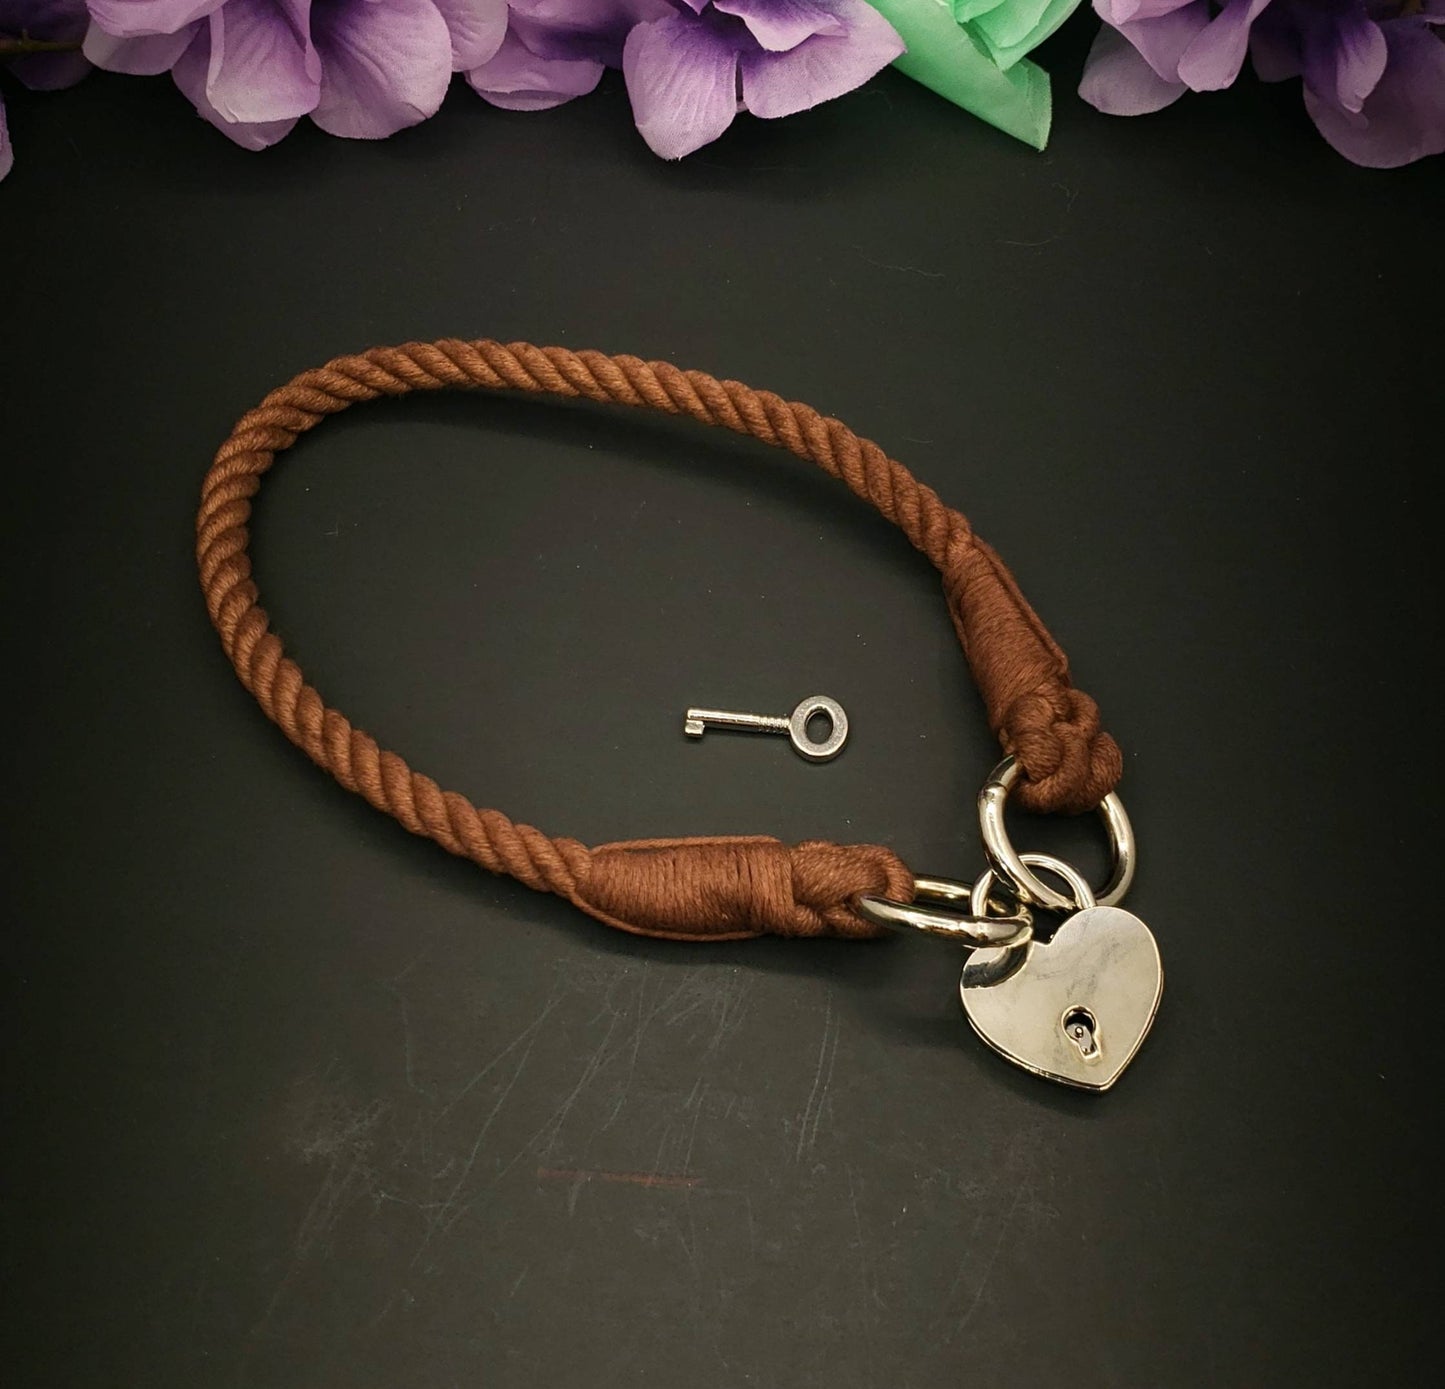 Brown Heart Locking Collar - BDSM Rope Choker - Submissive Cotton Collar | Novelty Choker Accessory for Roleplay